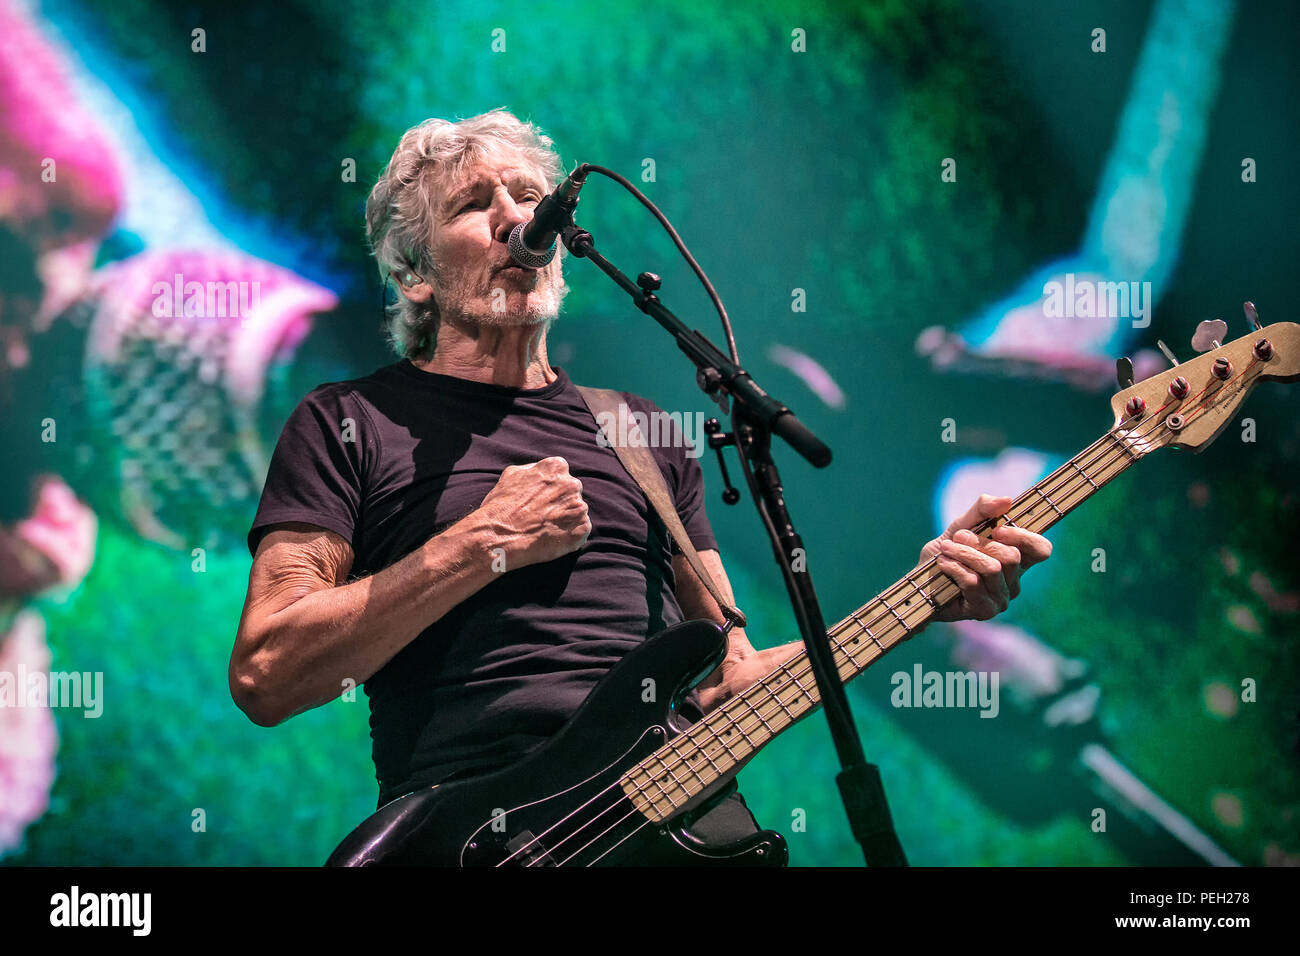 Norway, Oslo - August 14, 2018. The English singer, songwriter and musician Roger Waters performs a live concert at Telenor Arena in Oslo as part of the Us + Them Tour 2018. (Photo credit: Gonzales Photo - Terje Dokken) Credit: Gonzales Photo/Alamy Live News Stock Photo